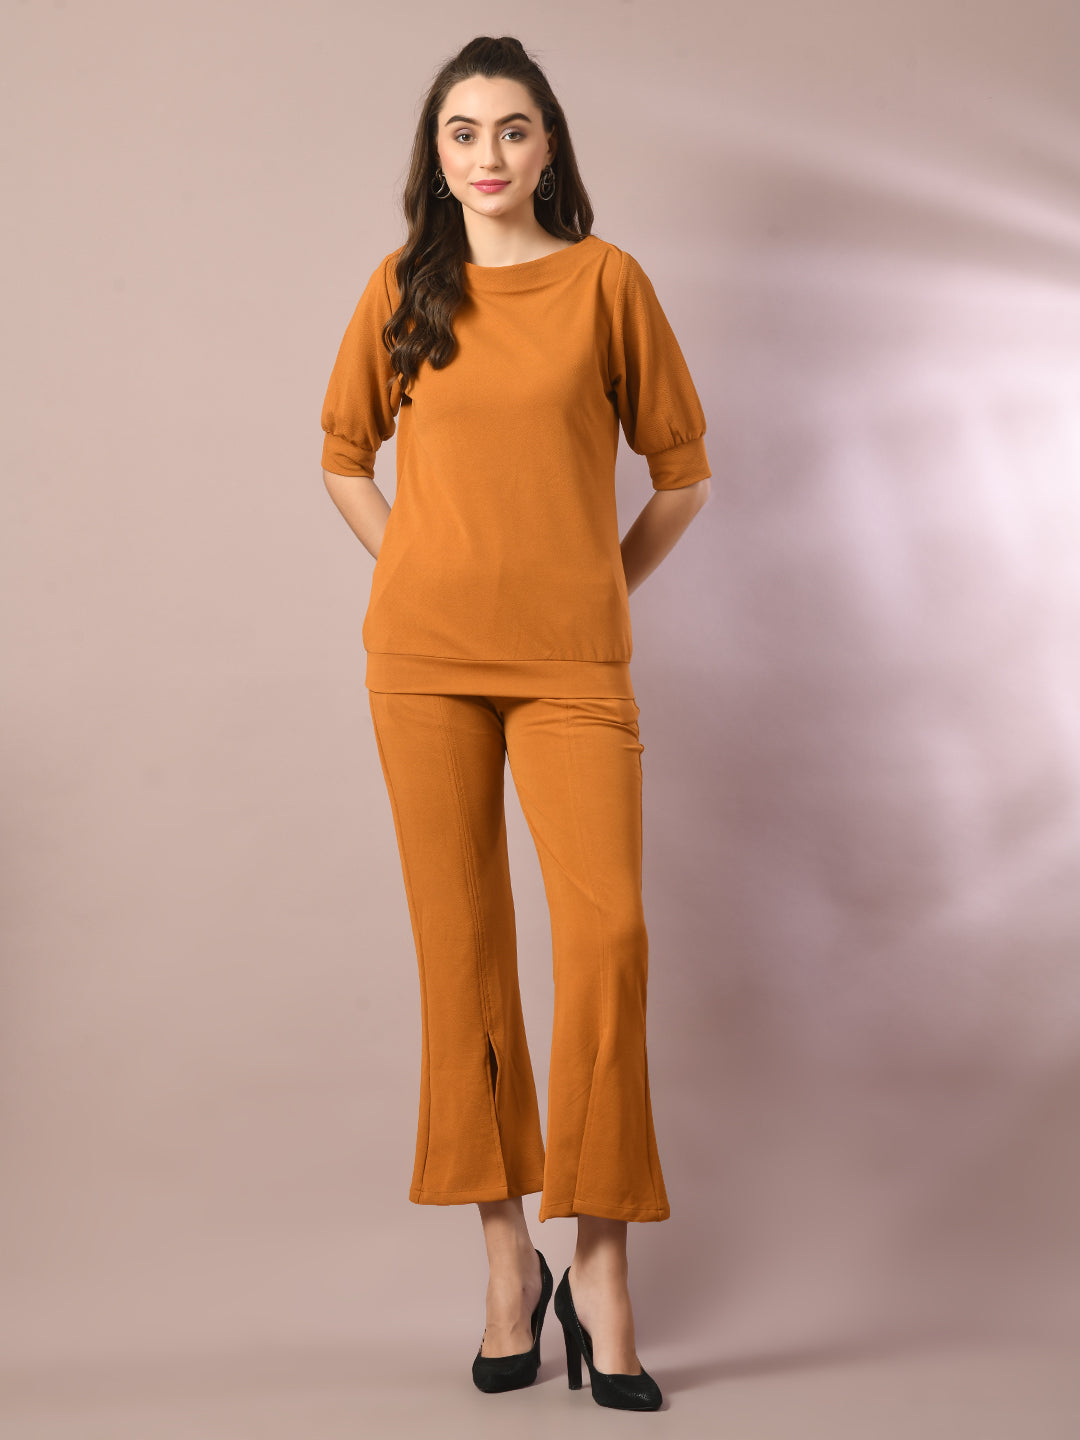 Women's  Mustard Solid Boat Neck Party Top With Trousers Co-Ord Set  - Myshka